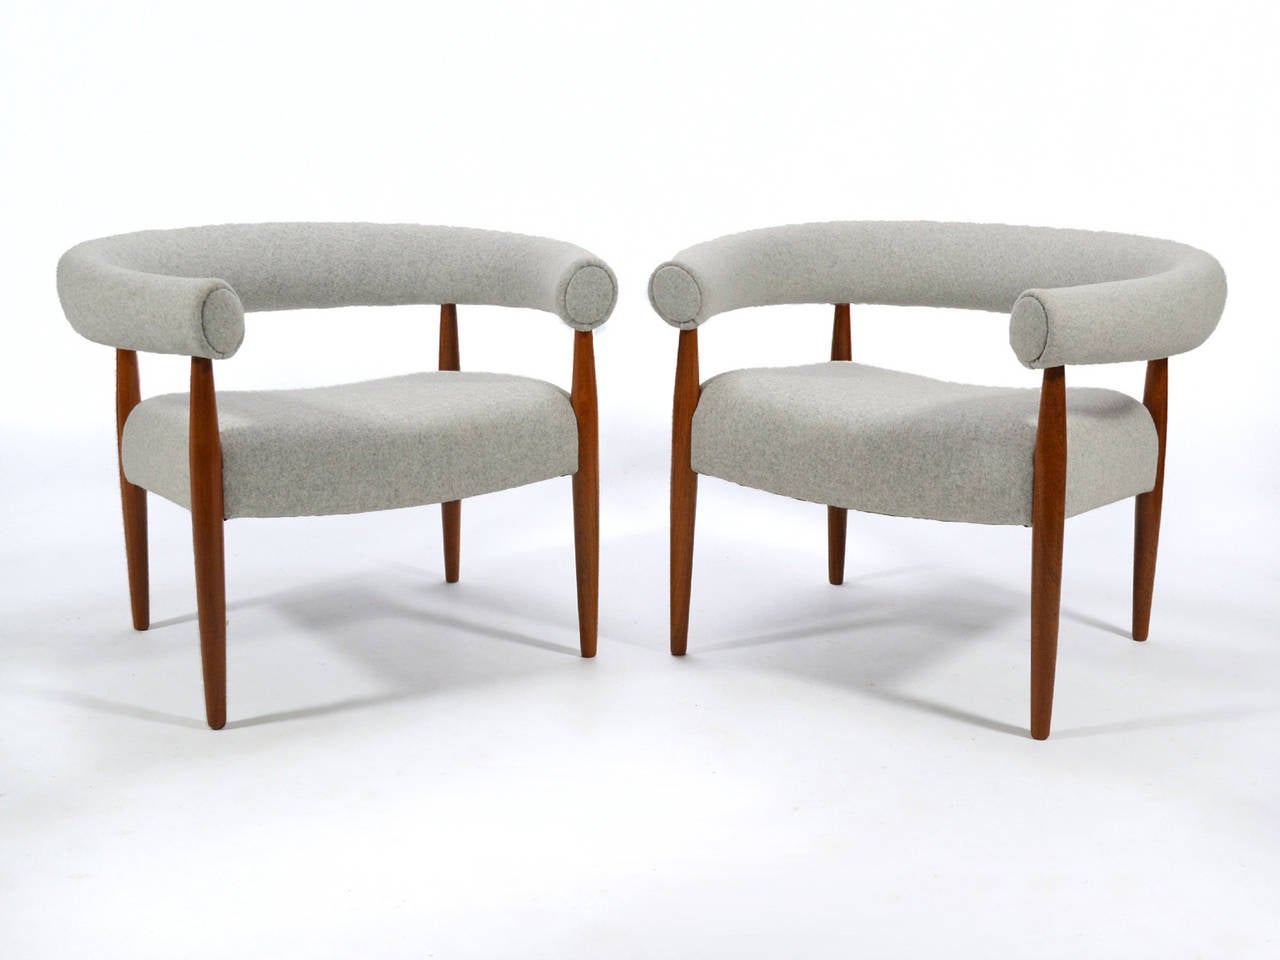 Designed in 1958 by Nanna and Jørgen Ditzel, the Ring chair (also called the Sausage chair) is a Classic Ditzel design. Circular in form, the arms and back are one piece which wraps around the sitter. The legs connect the back to the floating seat